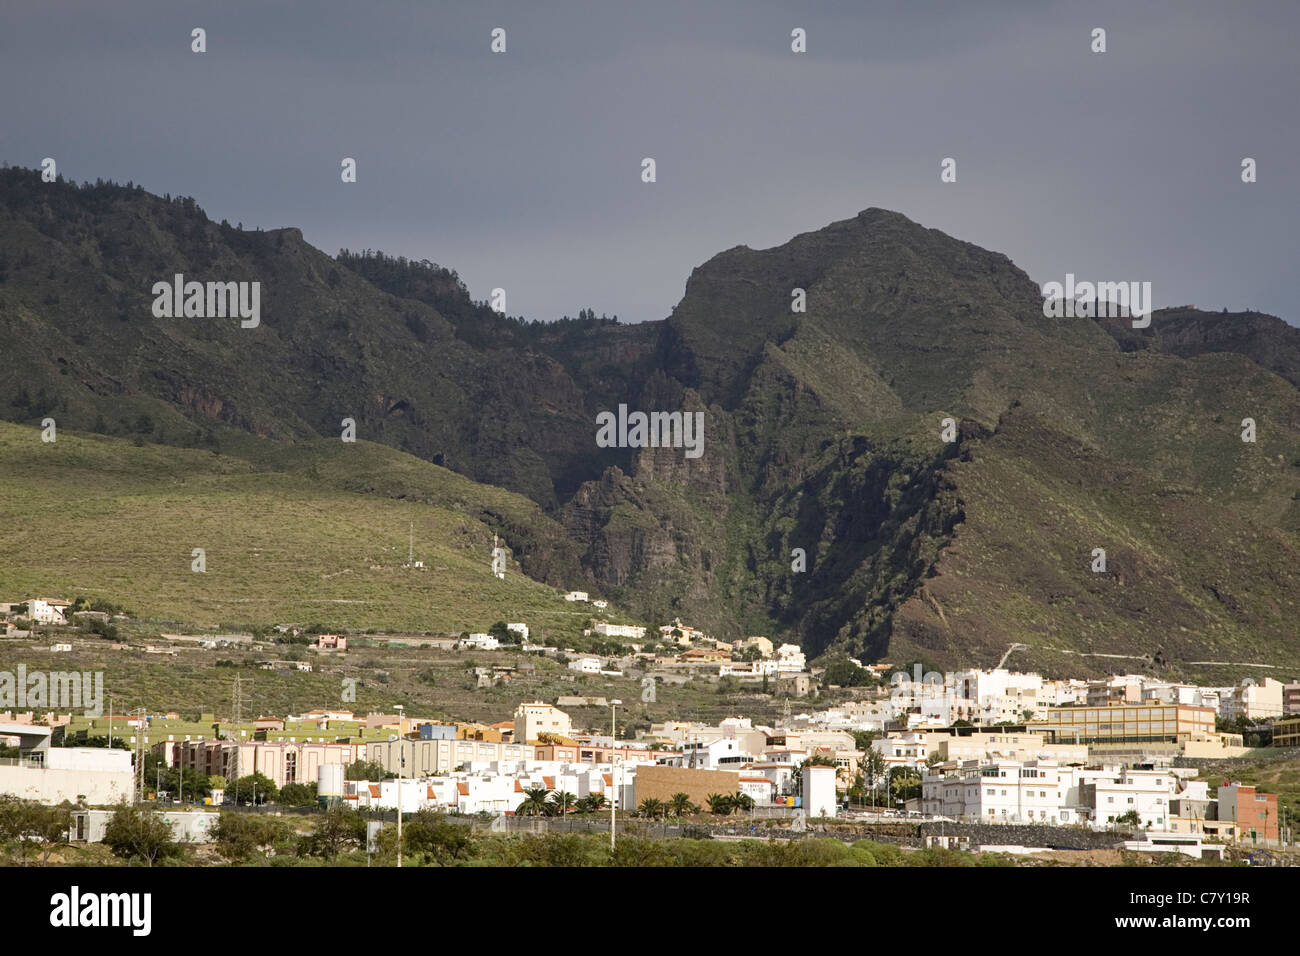 The town of Adeje with behind it the Barranco del Infierno (Hell's Ravine), Tenerife, Canary Islands, Spain Stock Photo